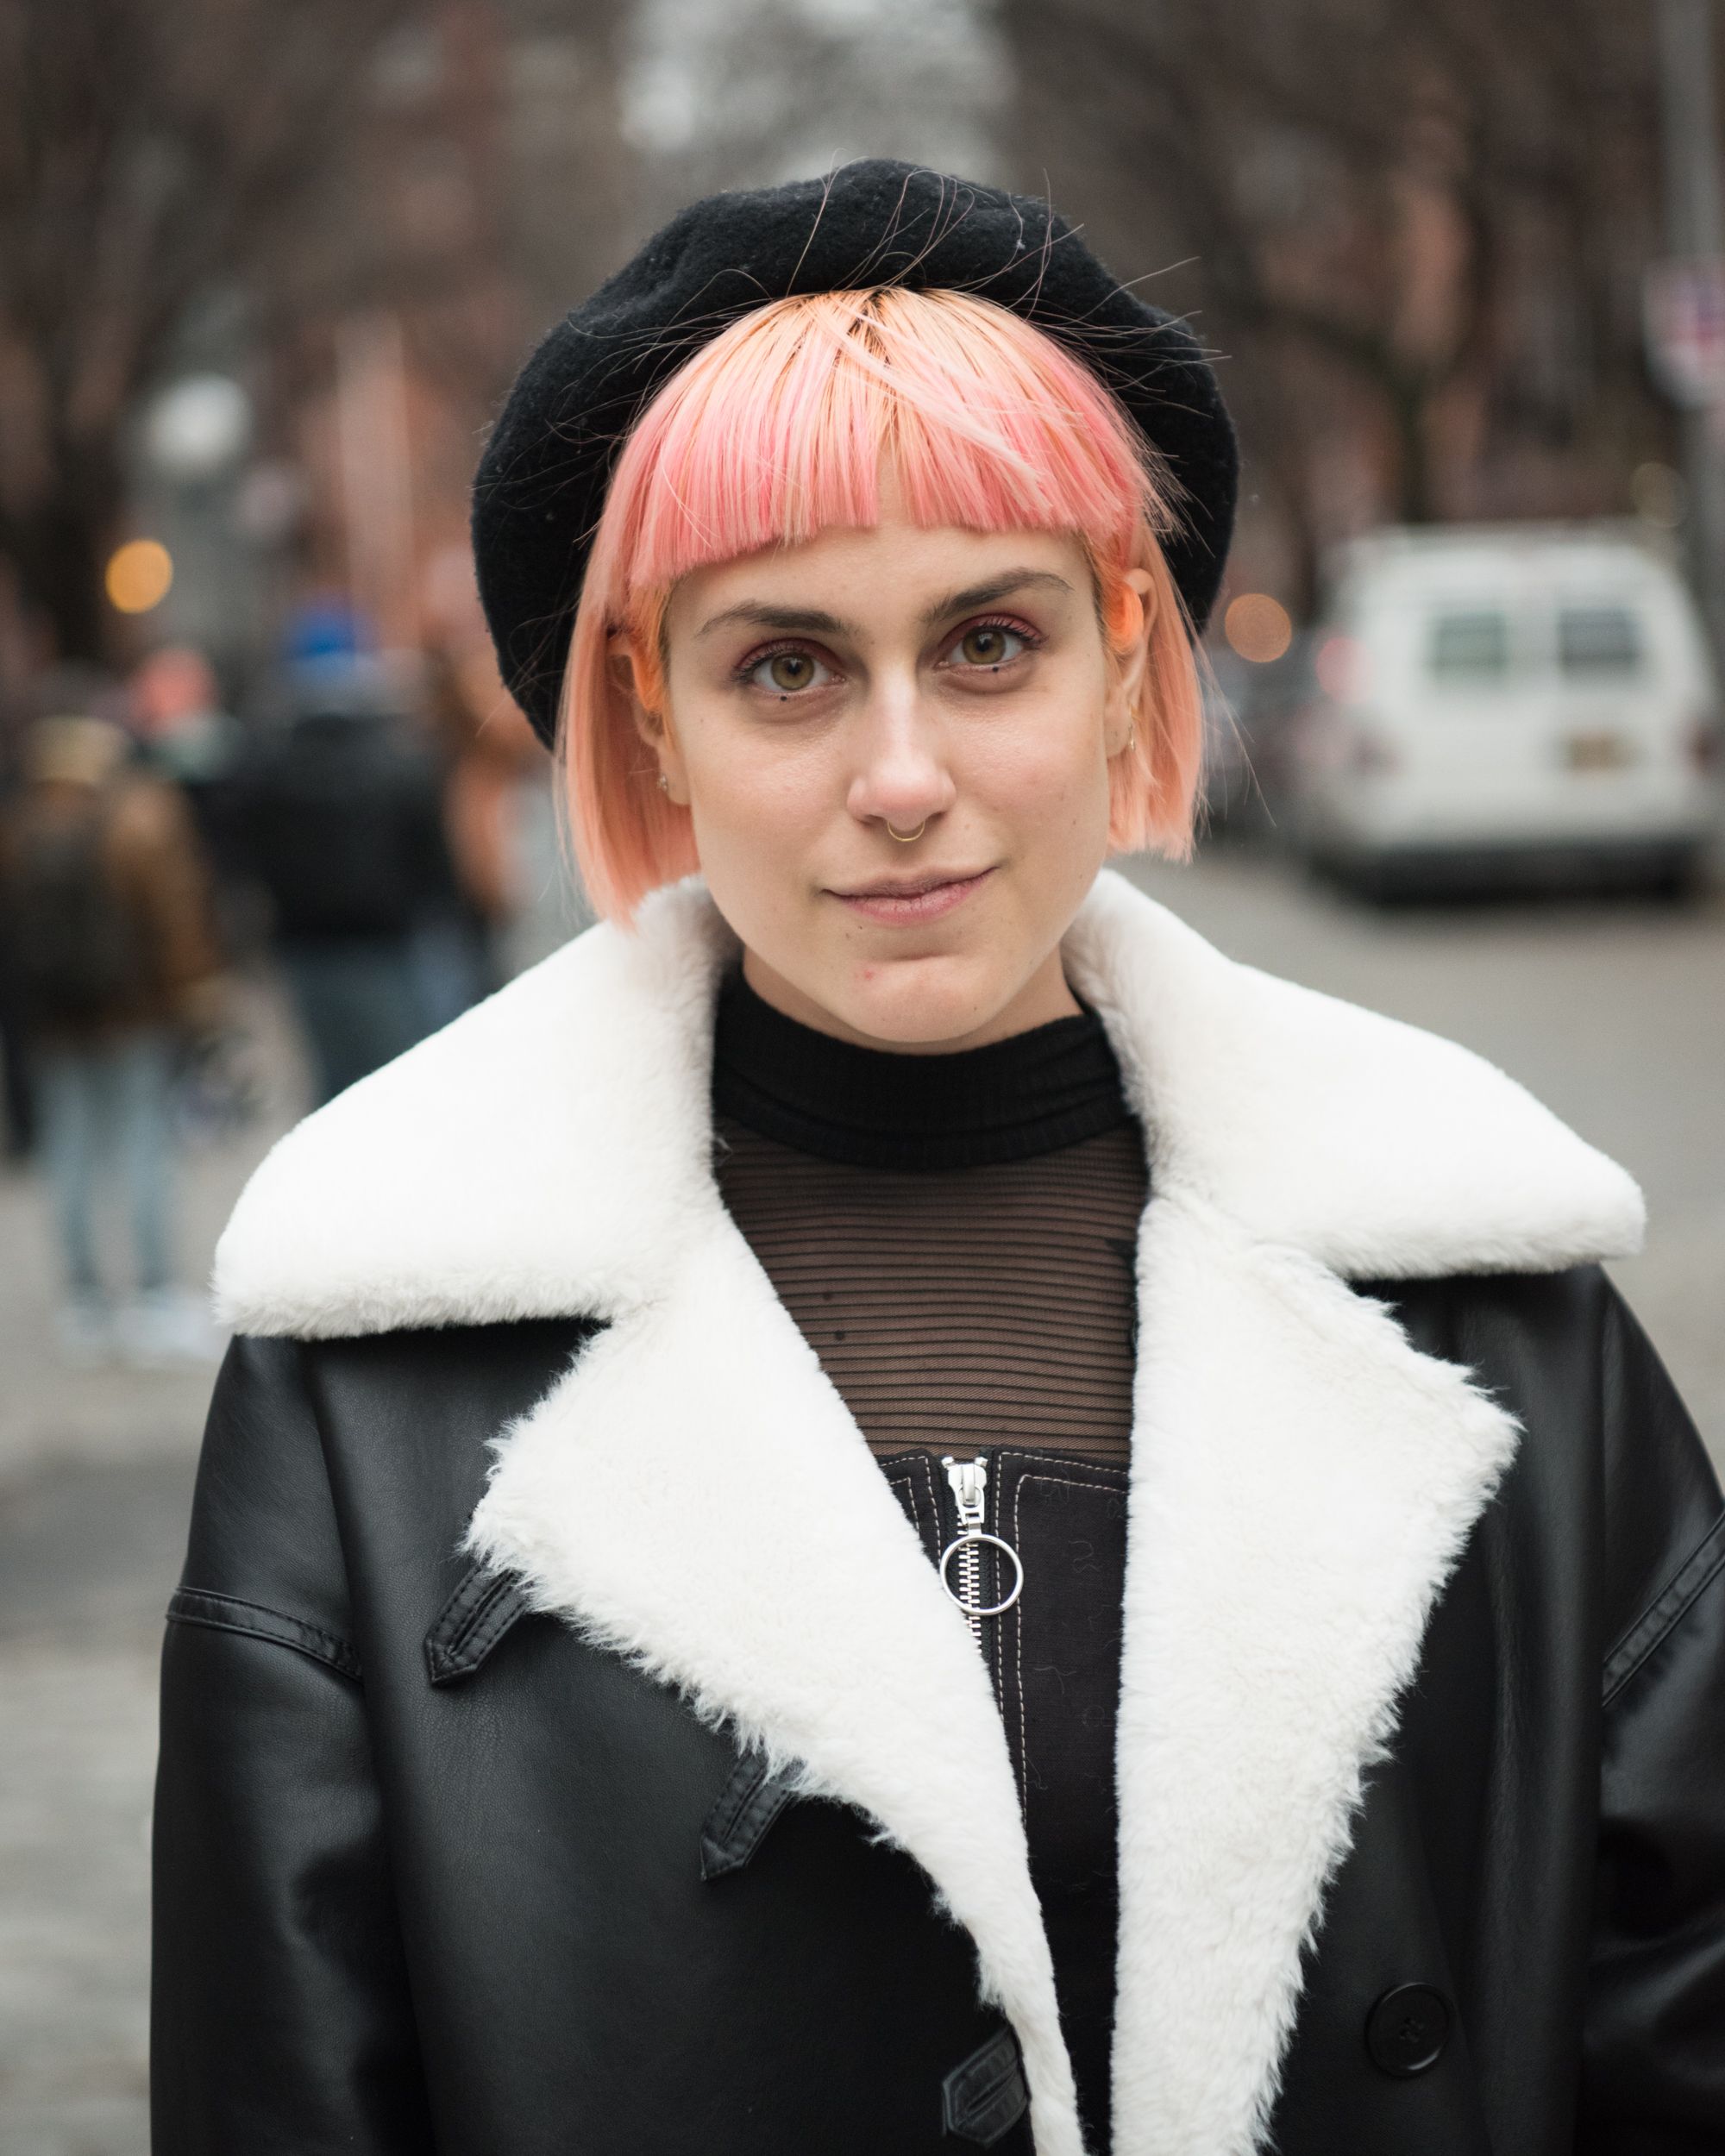 bold beauty looks are ruling nyfw street style & it’s so refreshing